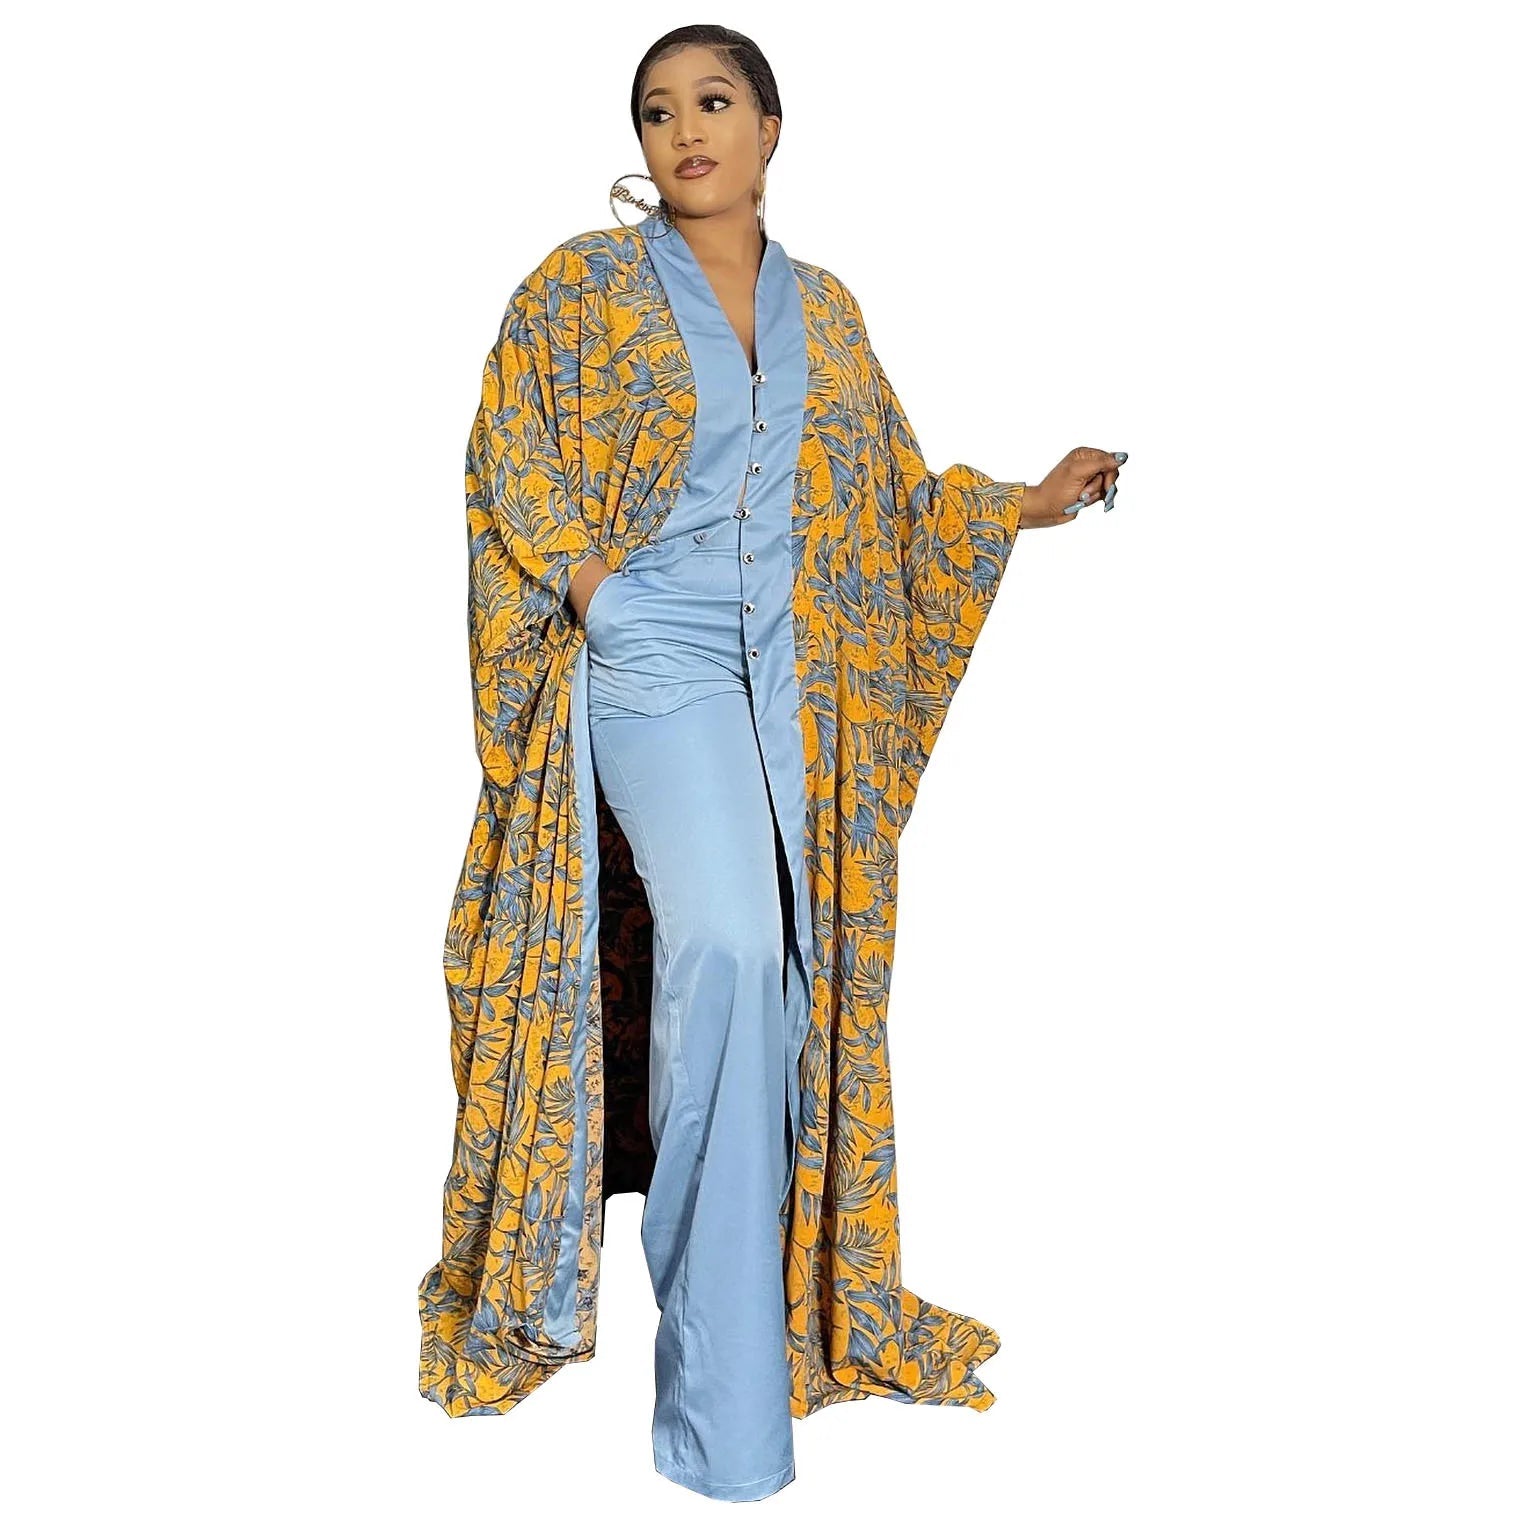 Floral Chic: 2PC African Women's Clothing Set - Cardigan Robe and Pant Suit with Vibrant Kanga Outfits - Flexi Africa - Flexi Africa offers Free Delivery Worldwide - Vibrant African traditional clothing showcasing bold prints and intricate designs